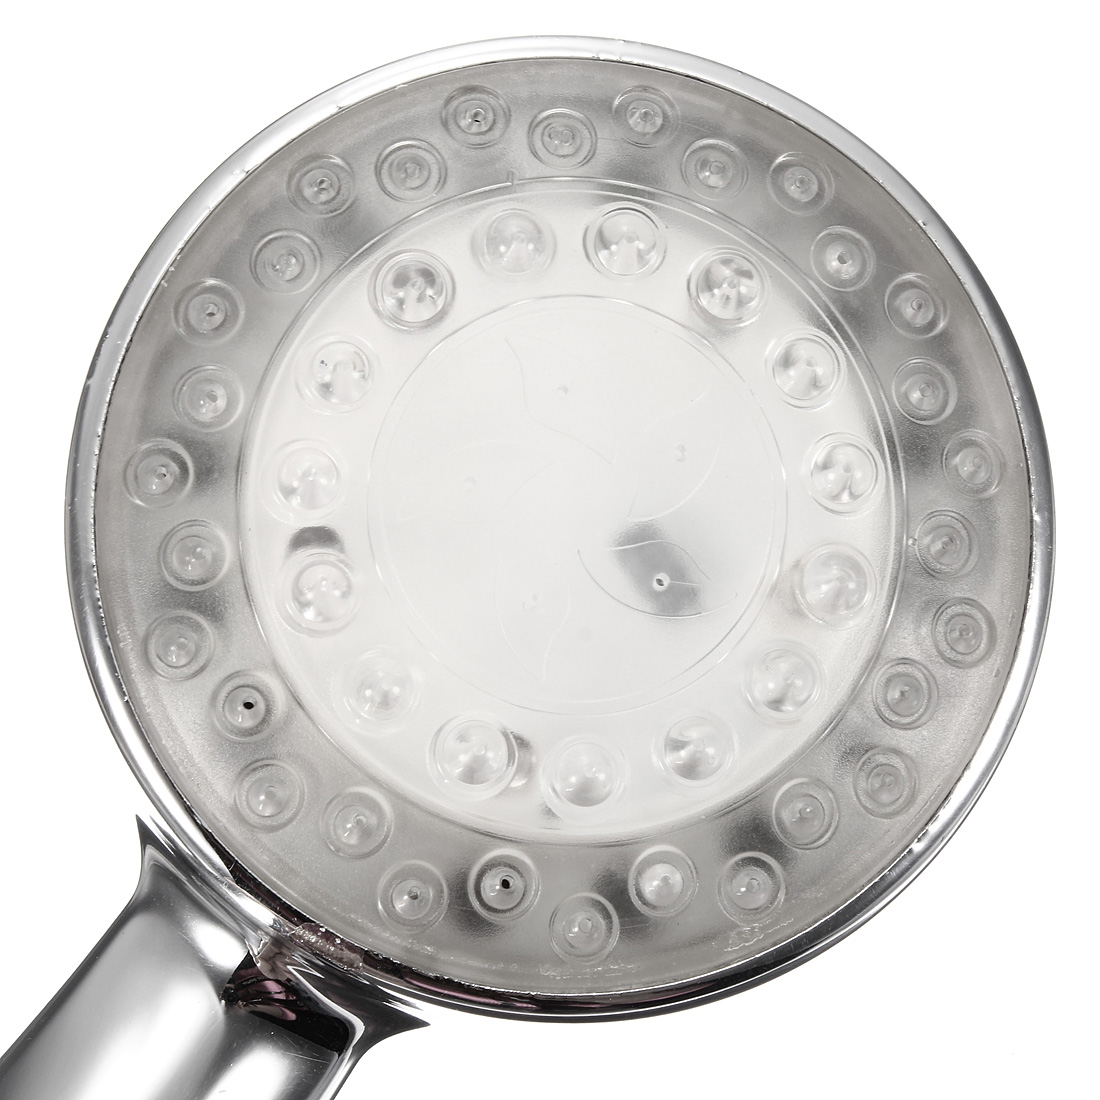 Chrome-Bathroom-Handheld-ABS-LED-Shower-Head-7-Color-Changing-Water-Glow-Light-1442625-12